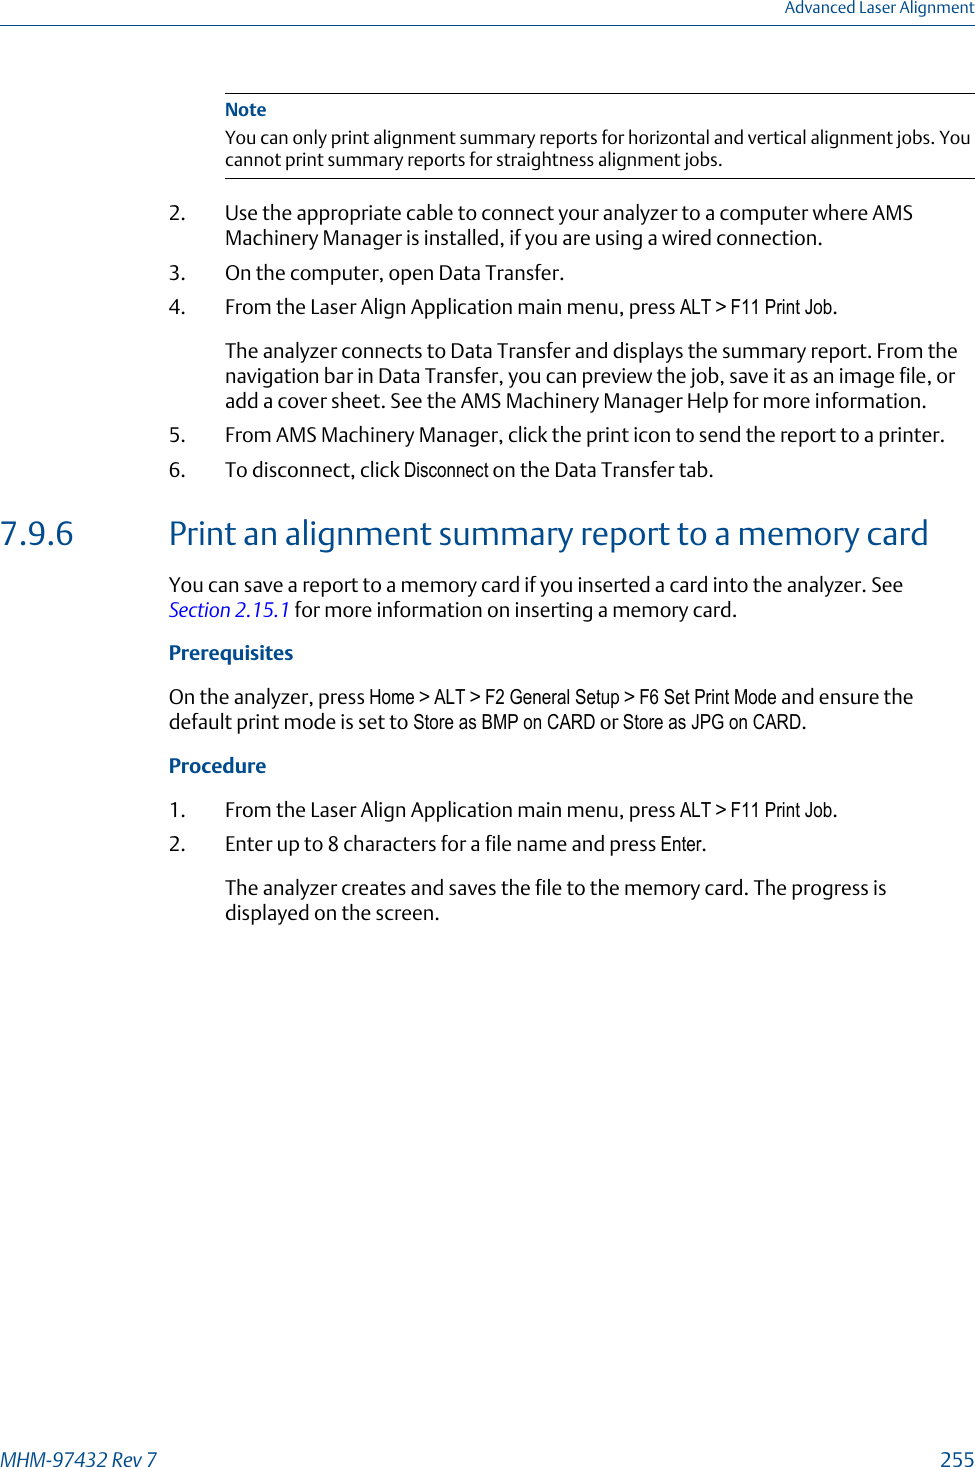 NoteYou can only print alignment summary reports for horizontal and vertical alignment jobs. Youcannot print summary reports for straightness alignment jobs.2. Use the appropriate cable to connect your analyzer to a computer where AMSMachinery Manager is installed, if you are using a wired connection.3. On the computer, open Data Transfer.4. From the Laser Align Application main menu, press ALT &gt; F11 Print Job.The analyzer connects to Data Transfer and displays the summary report. From thenavigation bar in Data Transfer, you can preview the job, save it as an image file, oradd a cover sheet. See the AMS Machinery Manager Help for more information.5. From AMS Machinery Manager, click the print icon to send the report to a printer.6. To disconnect, click Disconnect on the Data Transfer tab.7.9.6 Print an alignment summary report to a memory cardYou can save a report to a memory card if you inserted a card into the analyzer. See Section 2.15.1 for more information on inserting a memory card.PrerequisitesOn the analyzer, press Home &gt; ALT &gt; F2 General Setup &gt; F6 Set Print Mode and ensure thedefault print mode is set to Store as BMP on CARD or Store as JPG on CARD.Procedure1. From the Laser Align Application main menu, press ALT &gt; F11 Print Job.2. Enter up to 8 characters for a file name and press Enter.The analyzer creates and saves the file to the memory card. The progress isdisplayed on the screen.Advanced Laser AlignmentMHM-97432 Rev 7  255